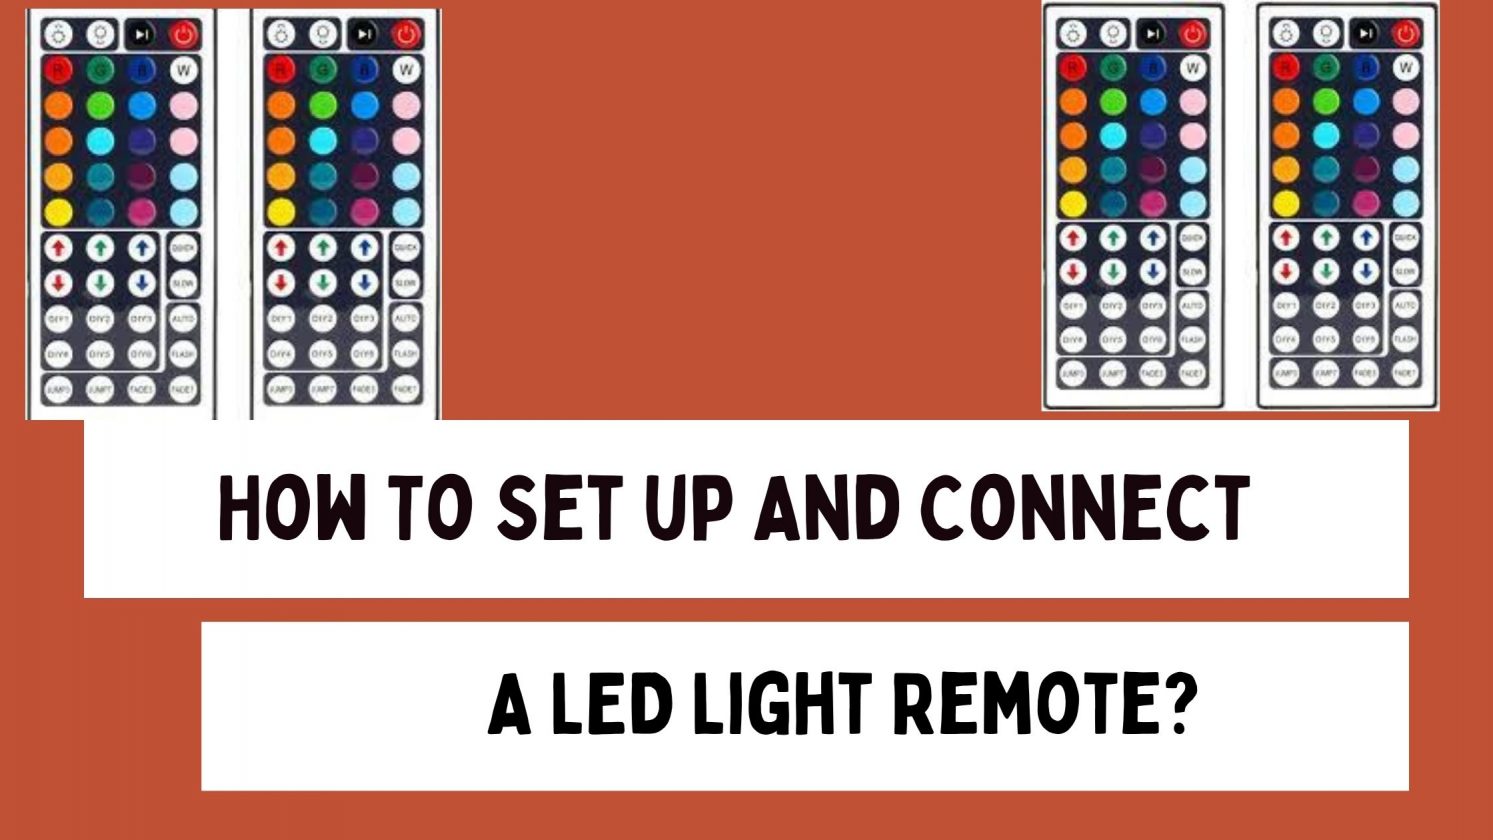 How To Set-up And Connect A LED Light Remote?